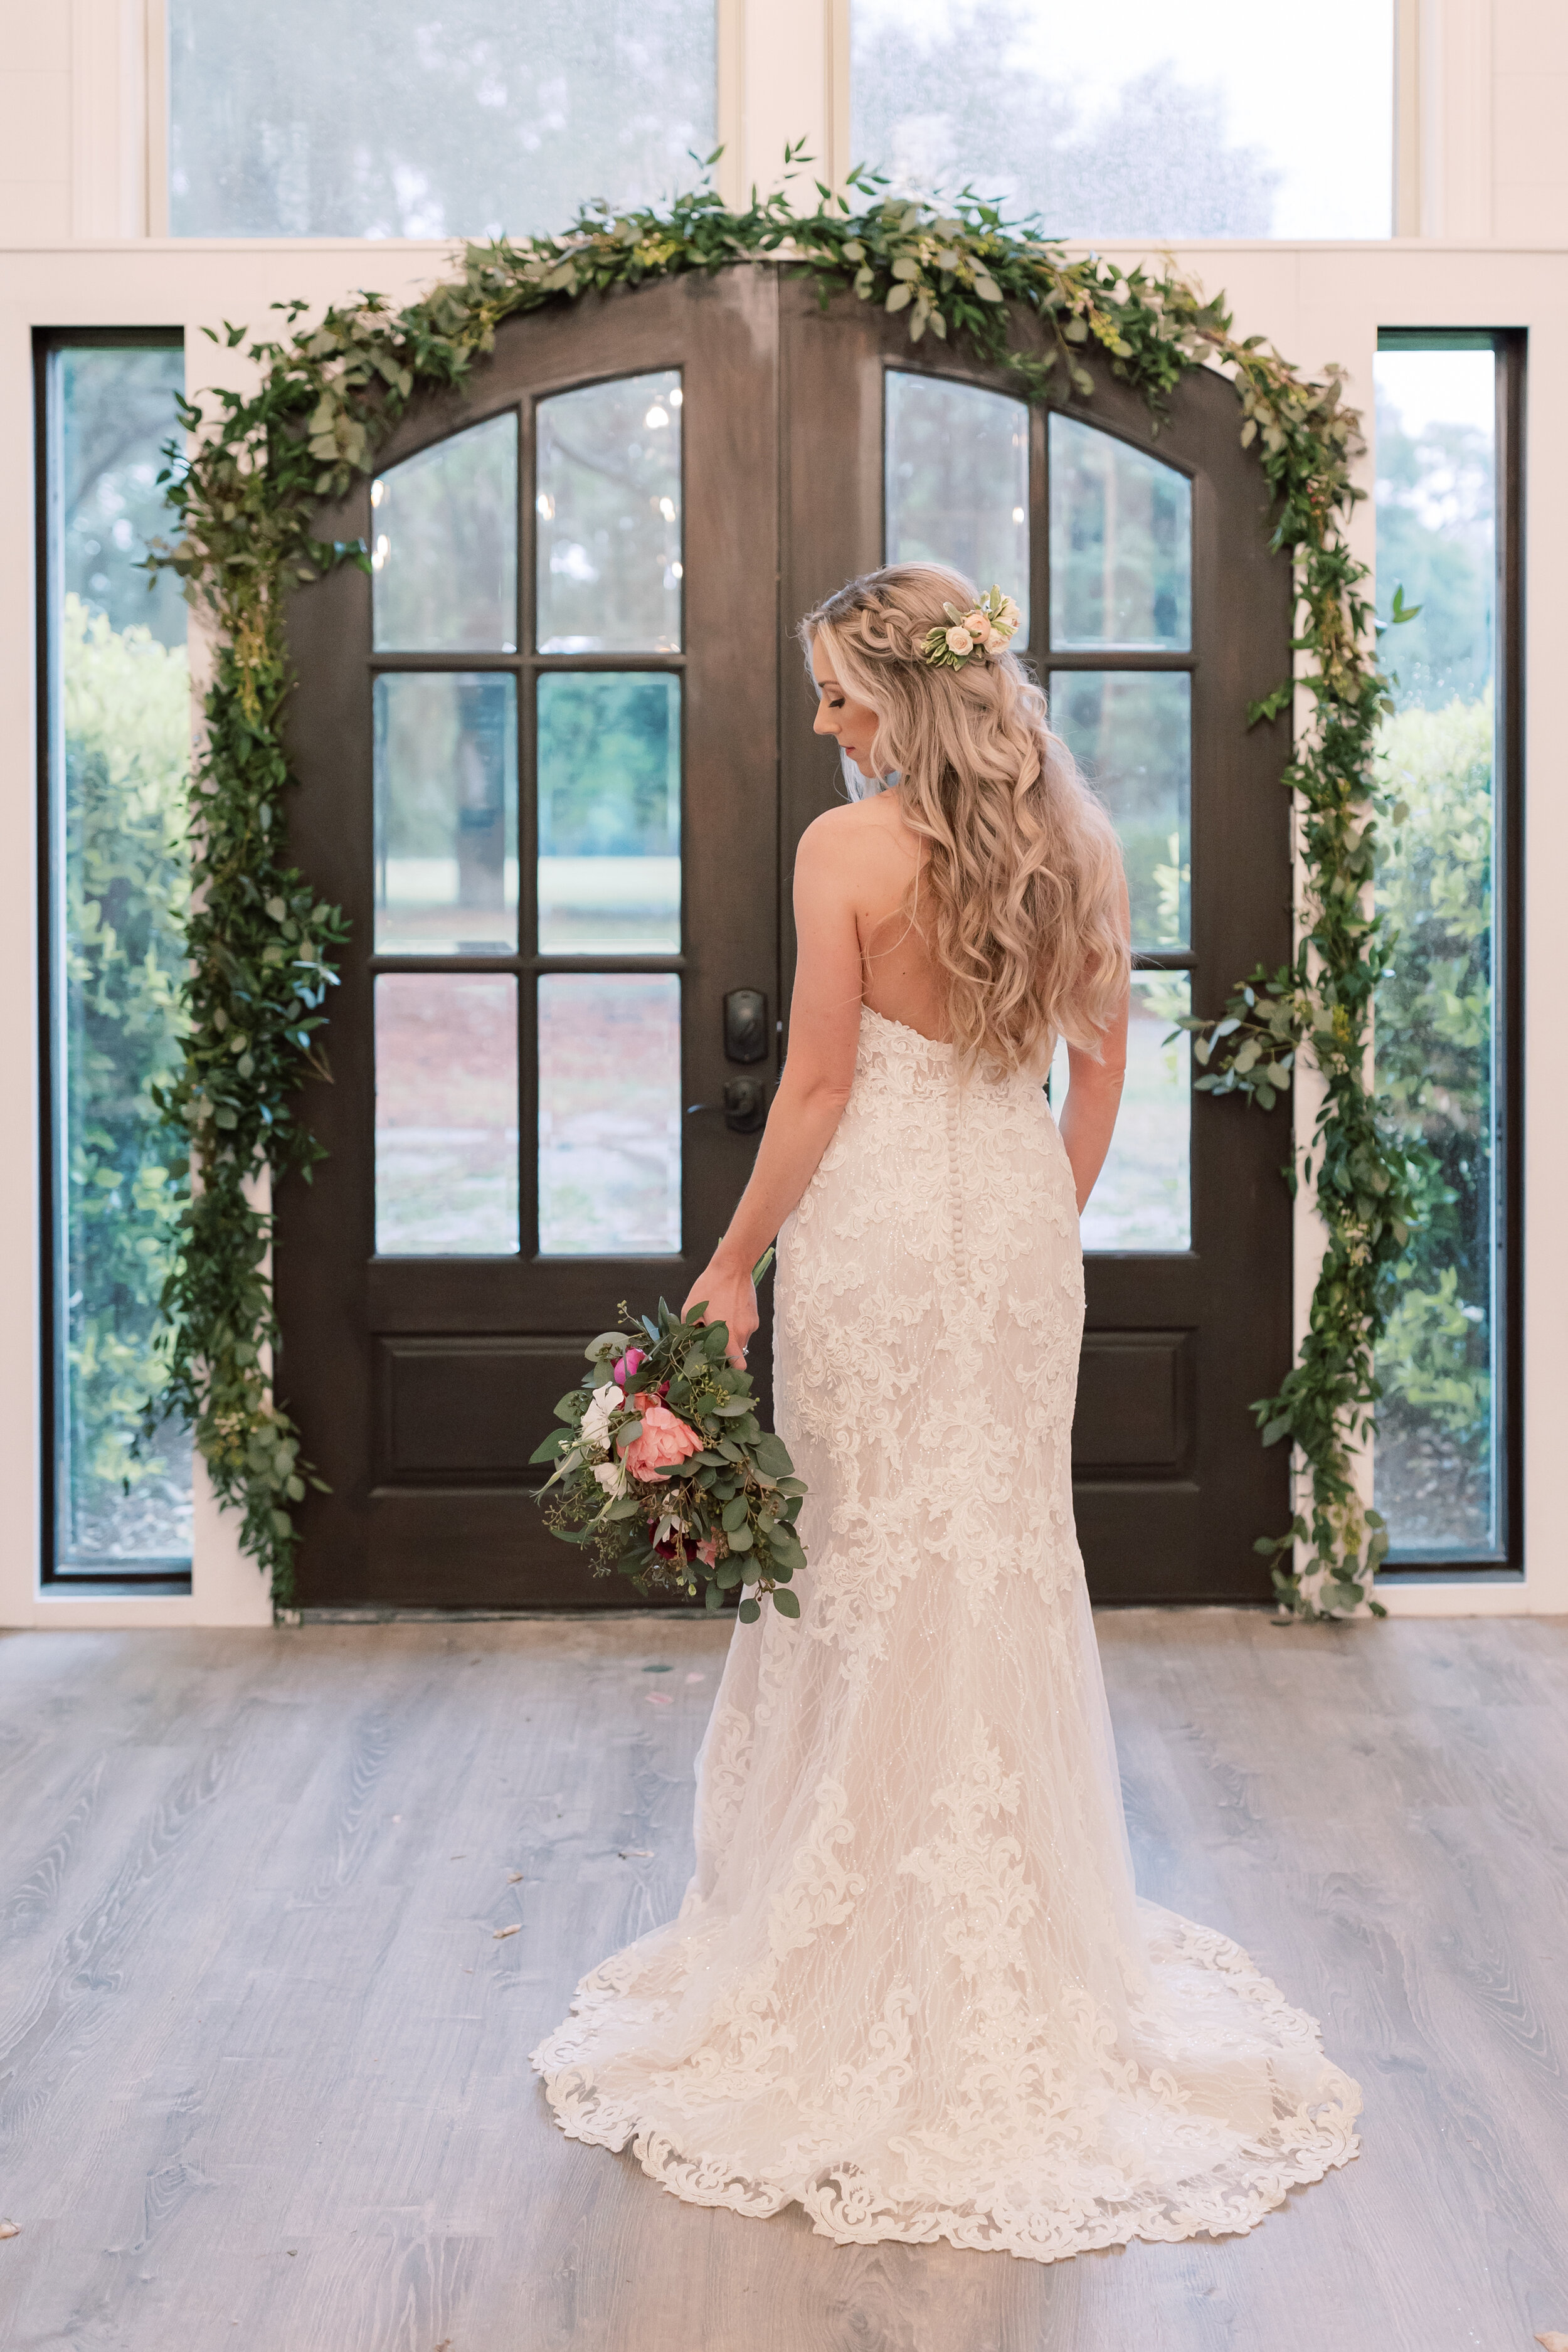 ivory-and-beau-blog-down-for-the-gown-shelby-real-bride-maggie-sottero-bride-wedding-dress-bridal-shop-bridal-boutique-savannah-georgia-KDP_Graham_Bridesmaids-200.jpg